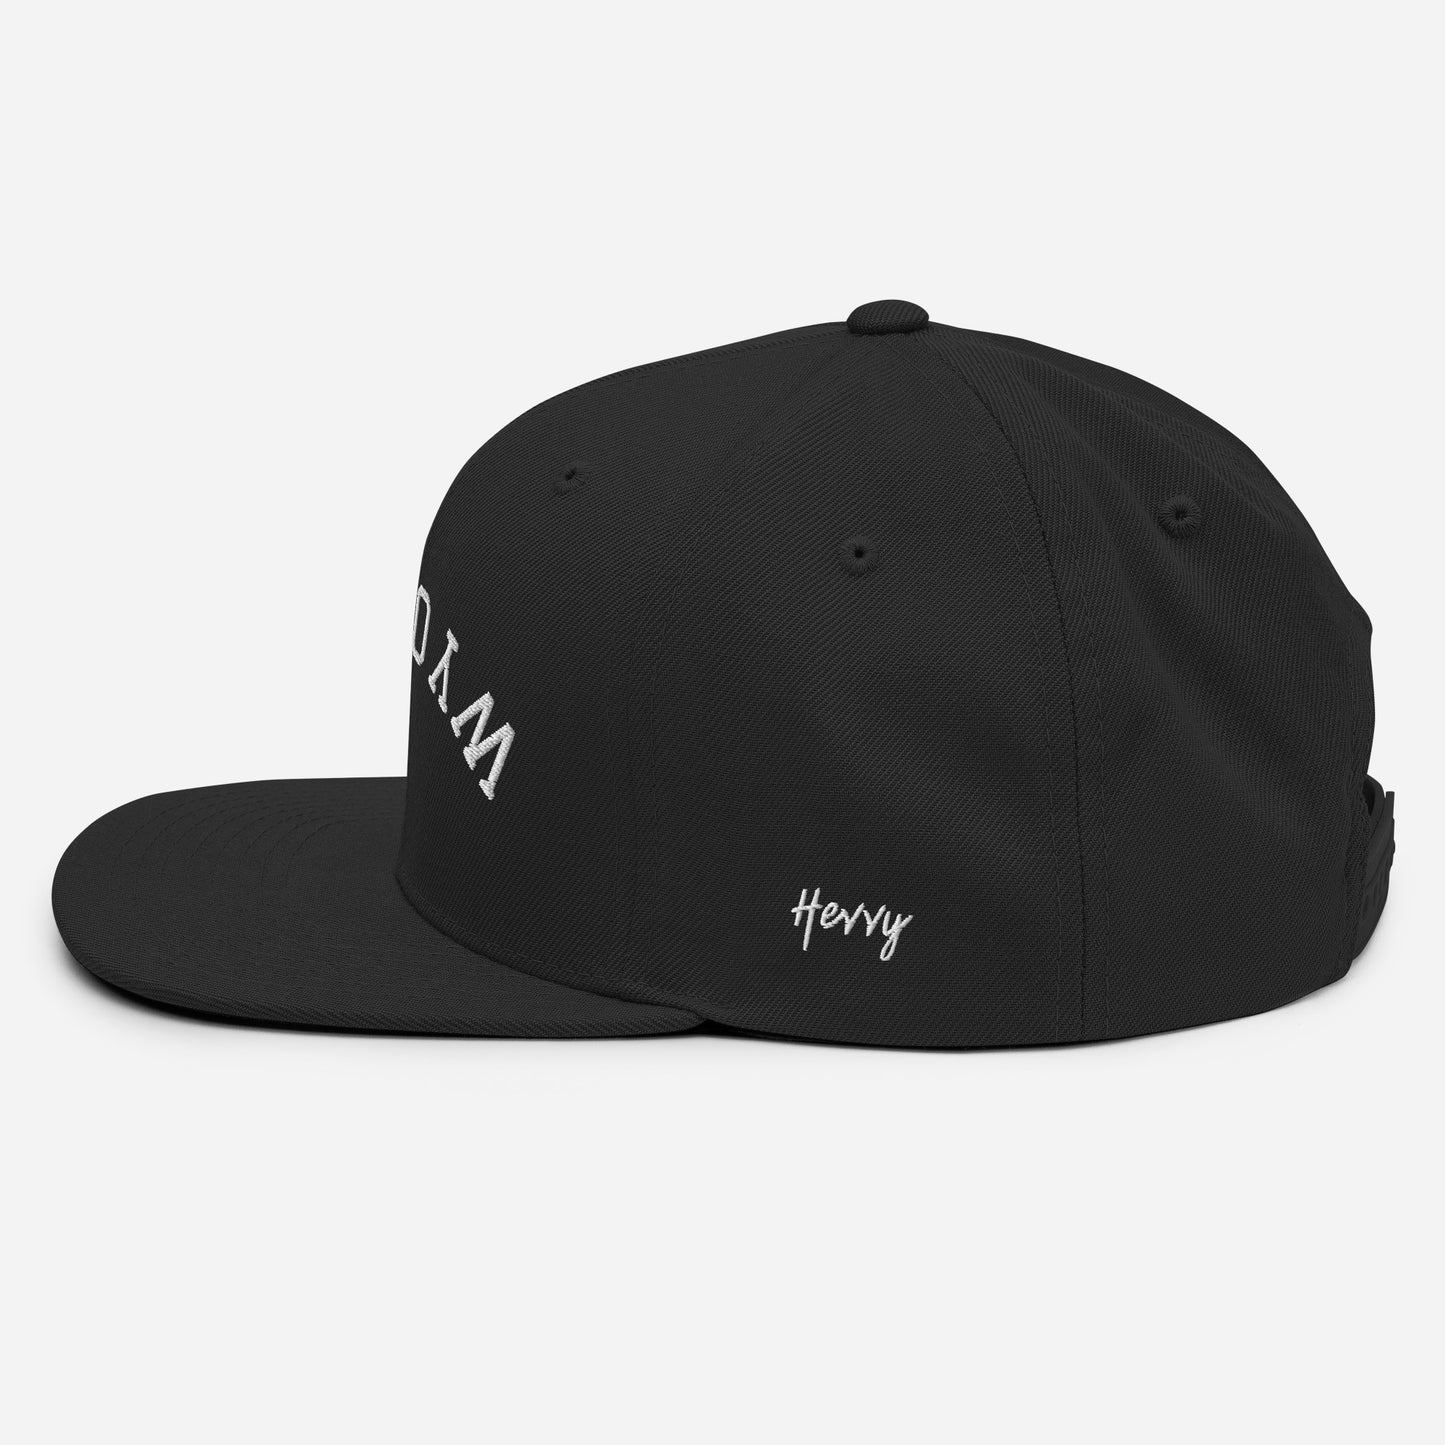 Wyoming Upside Down Arch 6 Panel Snapback Hat